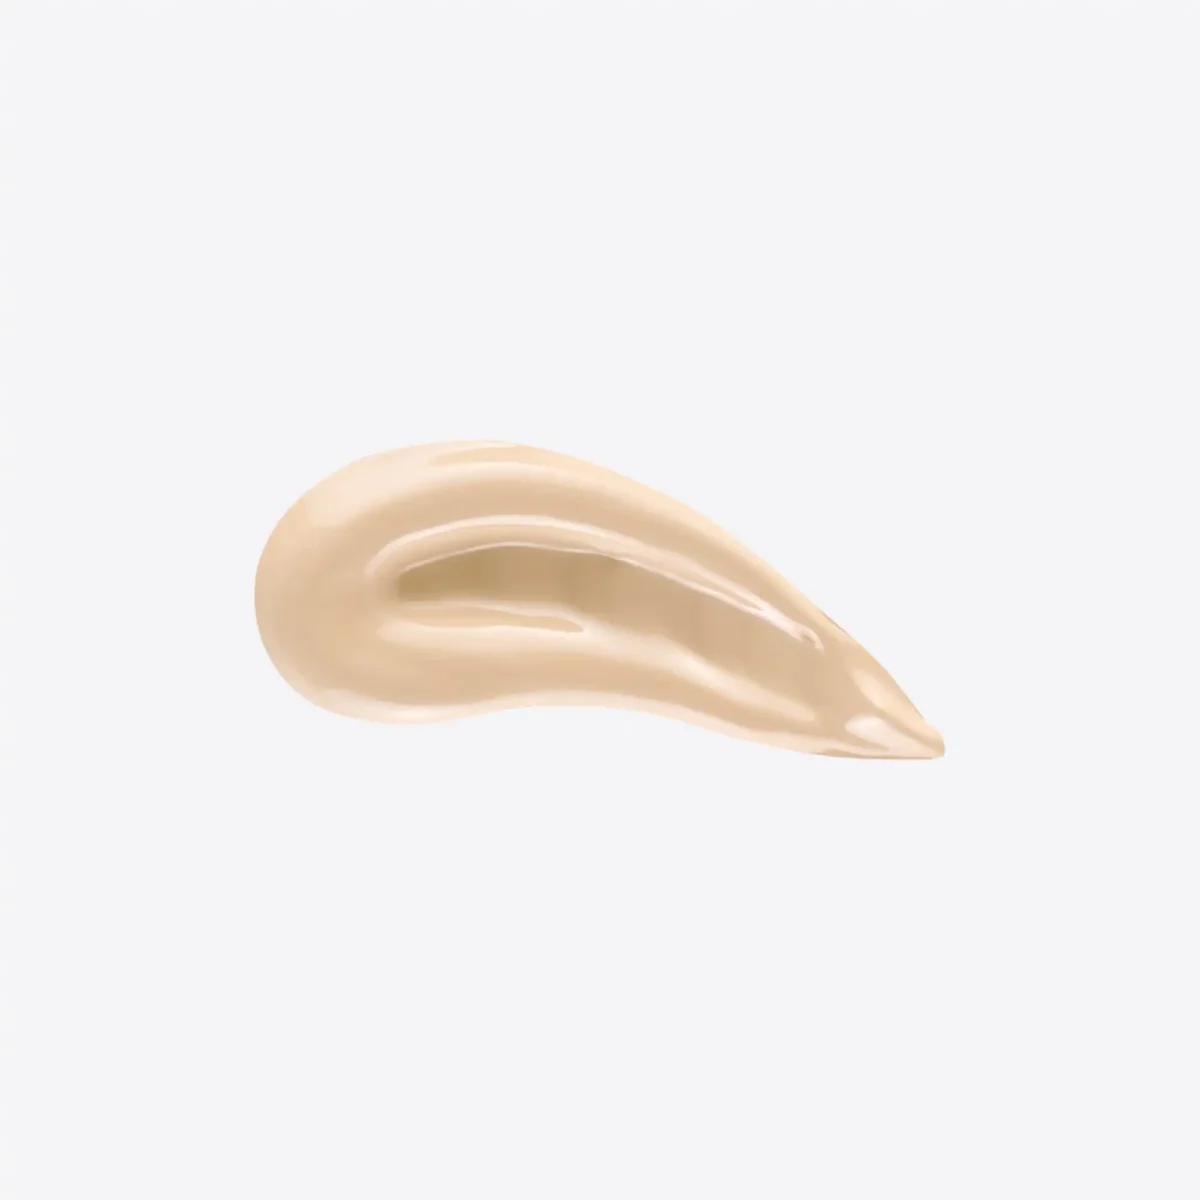 Conceal and Protect Liquid Concealer 02 Sand swatch